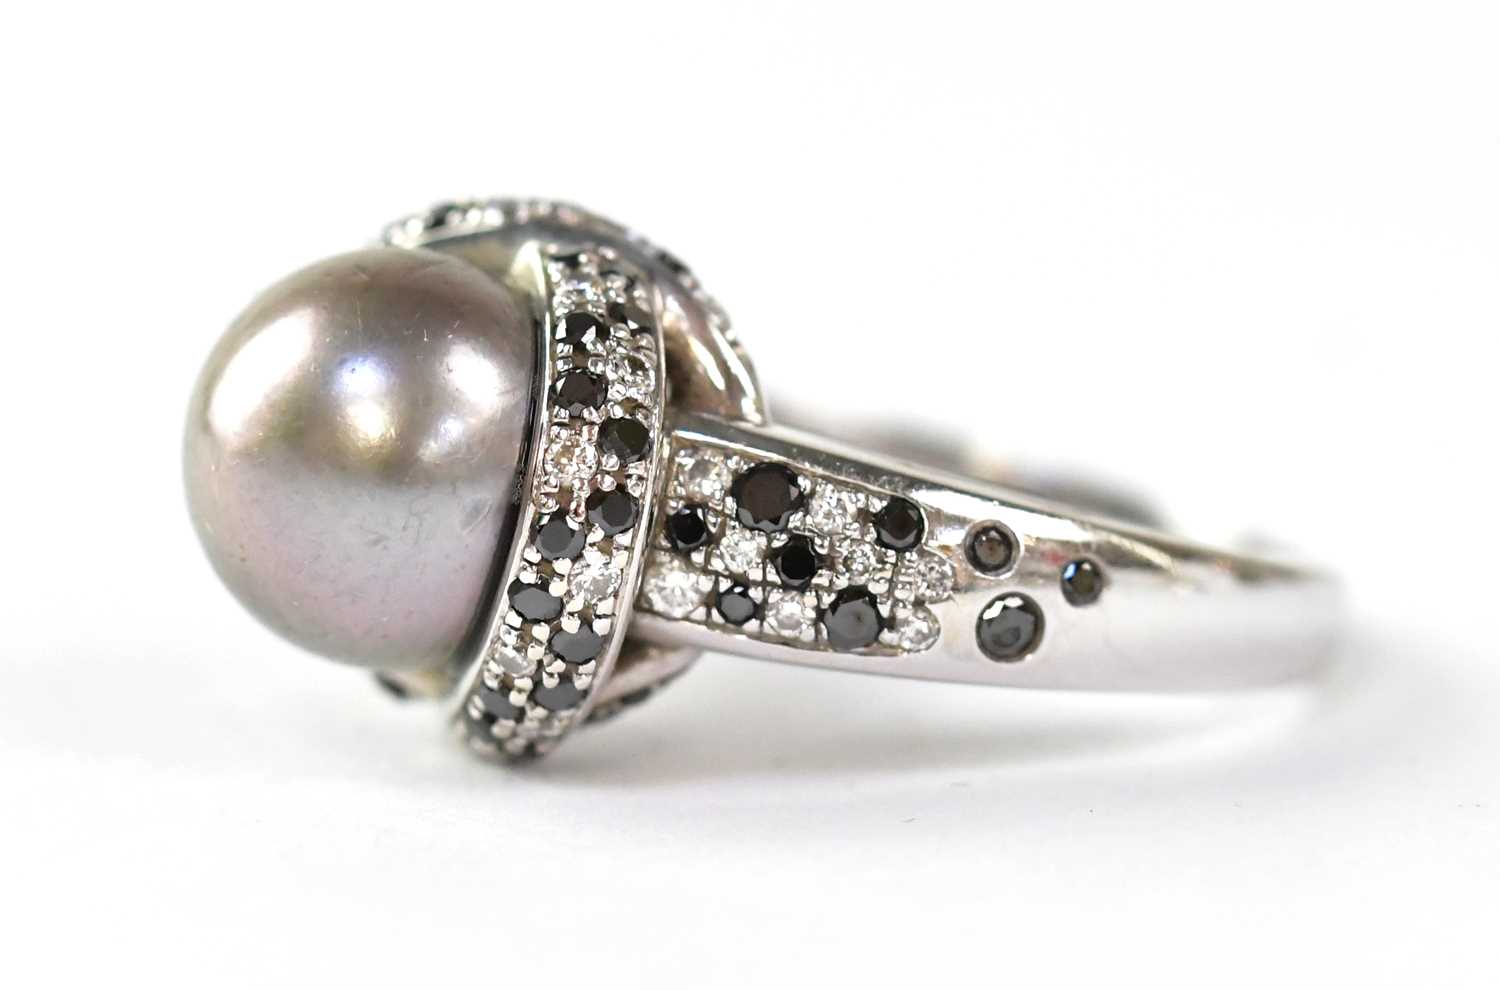 MAUBOUSSIN; an 18ct white gold 'Perle Caviar Mon Amour' ring set with a grey cultured pearl, - Image 2 of 2